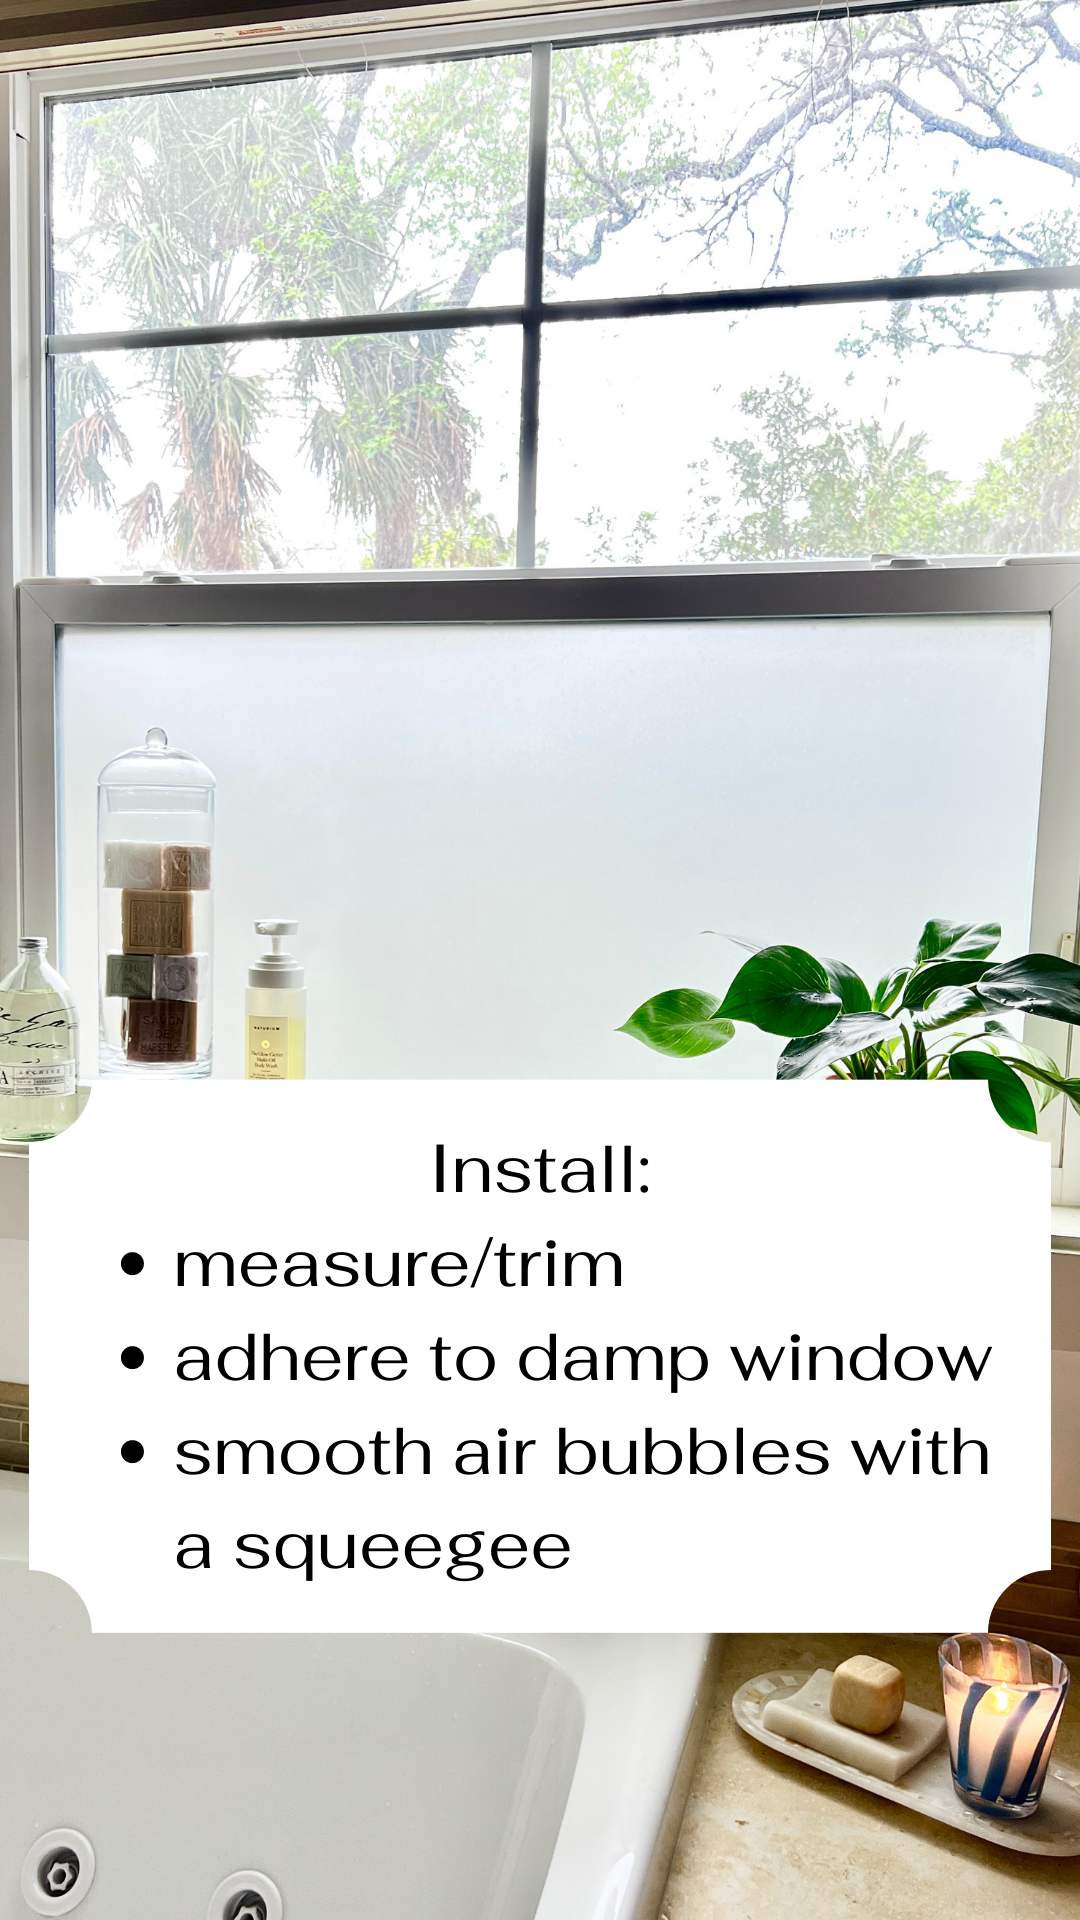 how to install privacy film on bathroom window